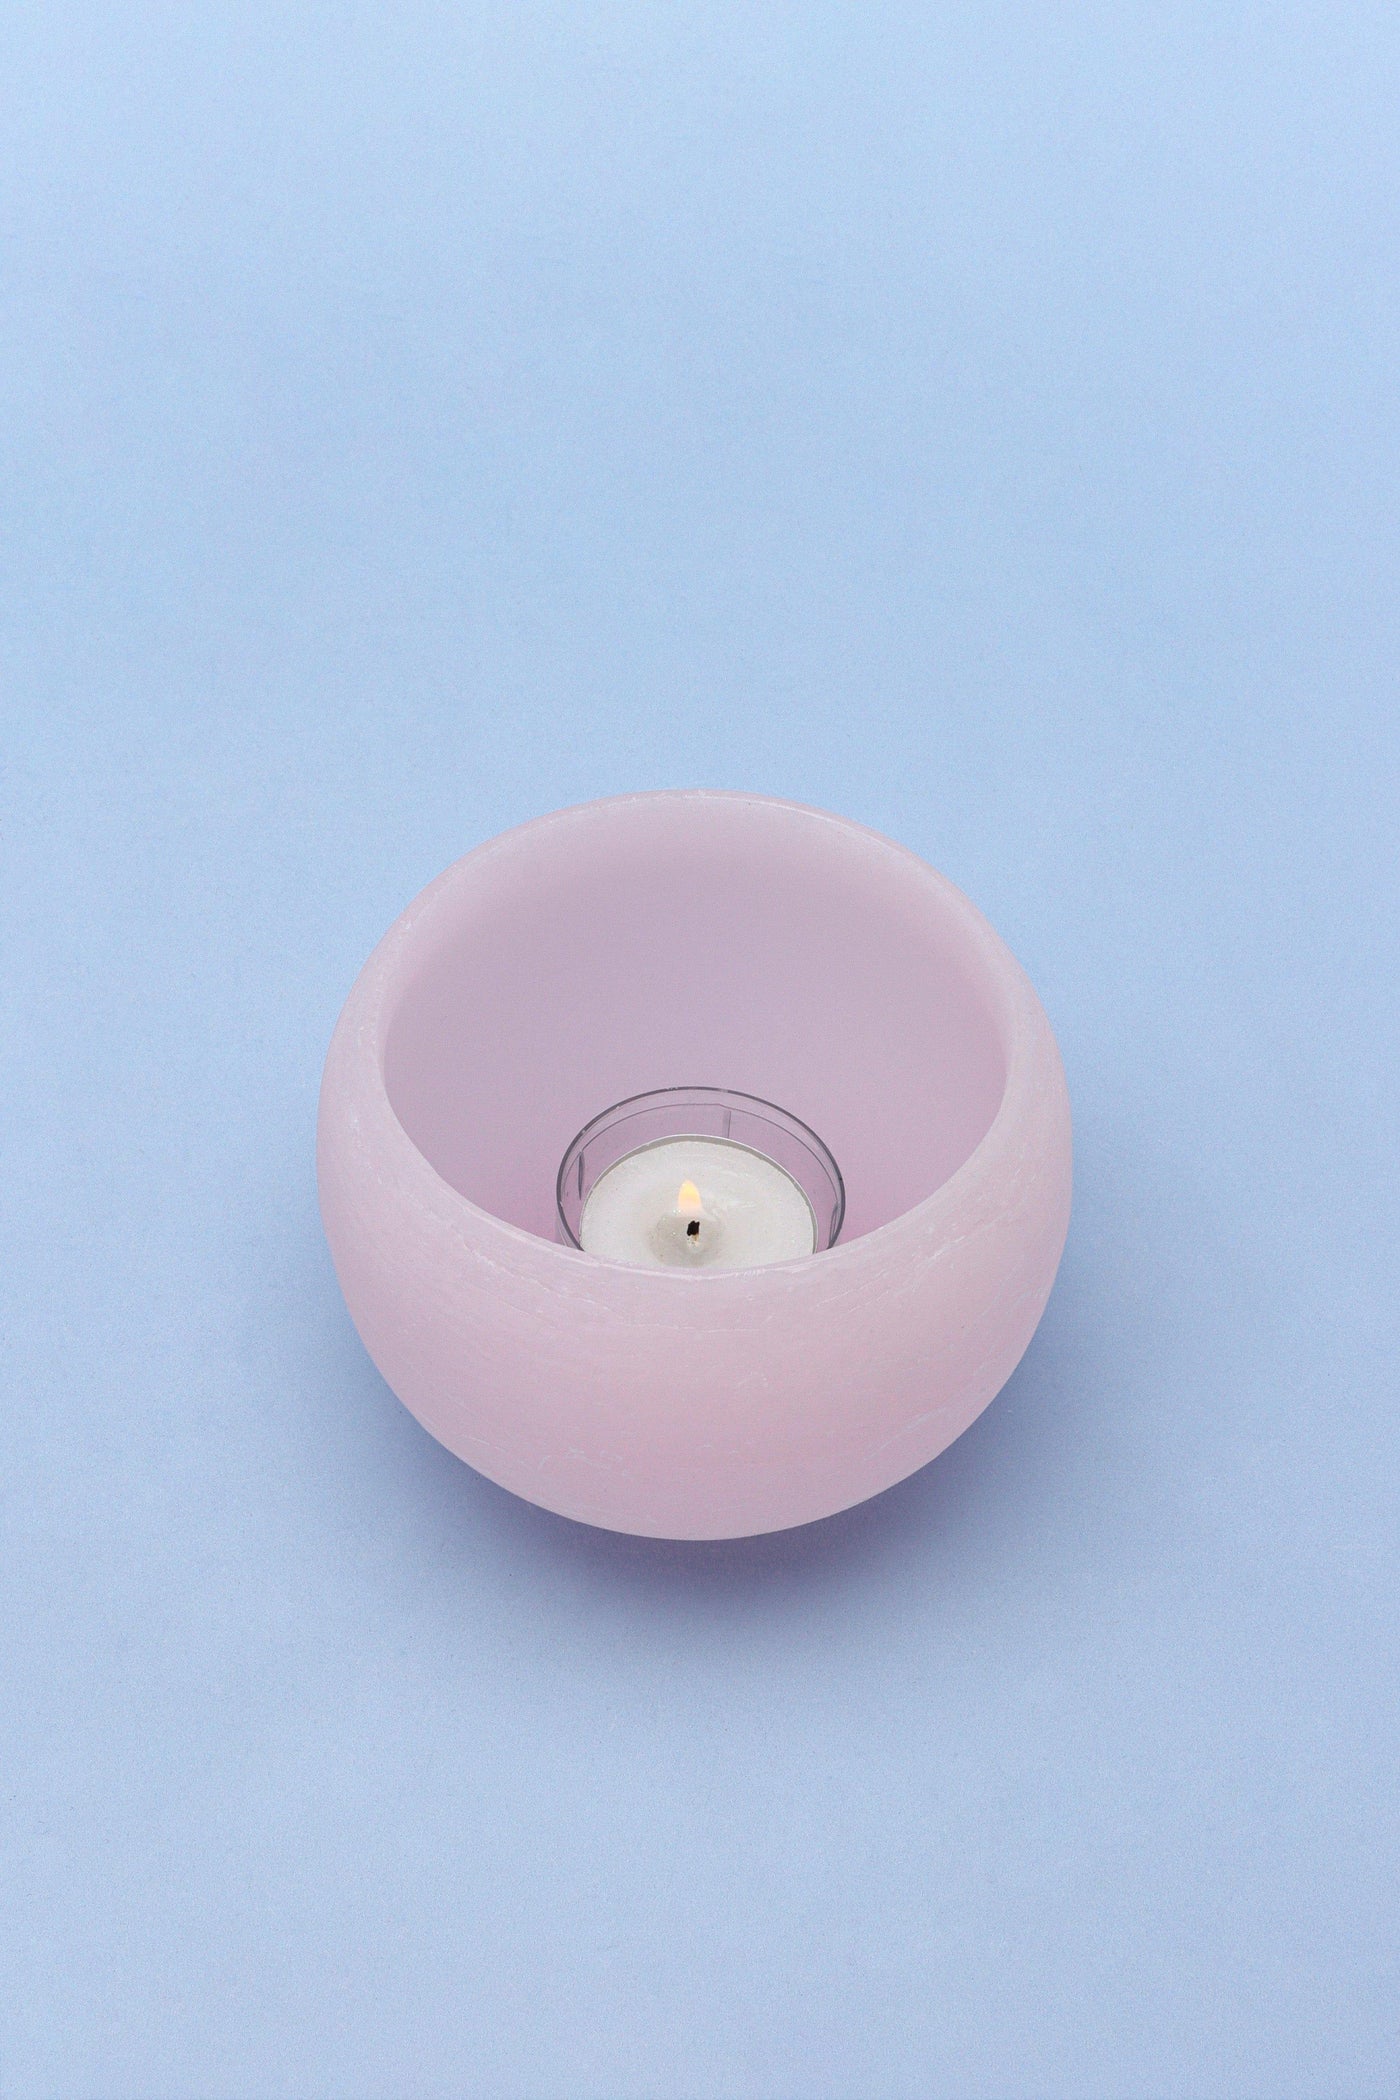 Gdecorstore Candles & Candle Holders Pink Georgia Pastel Ombre Sphere Wax Tealight Holder